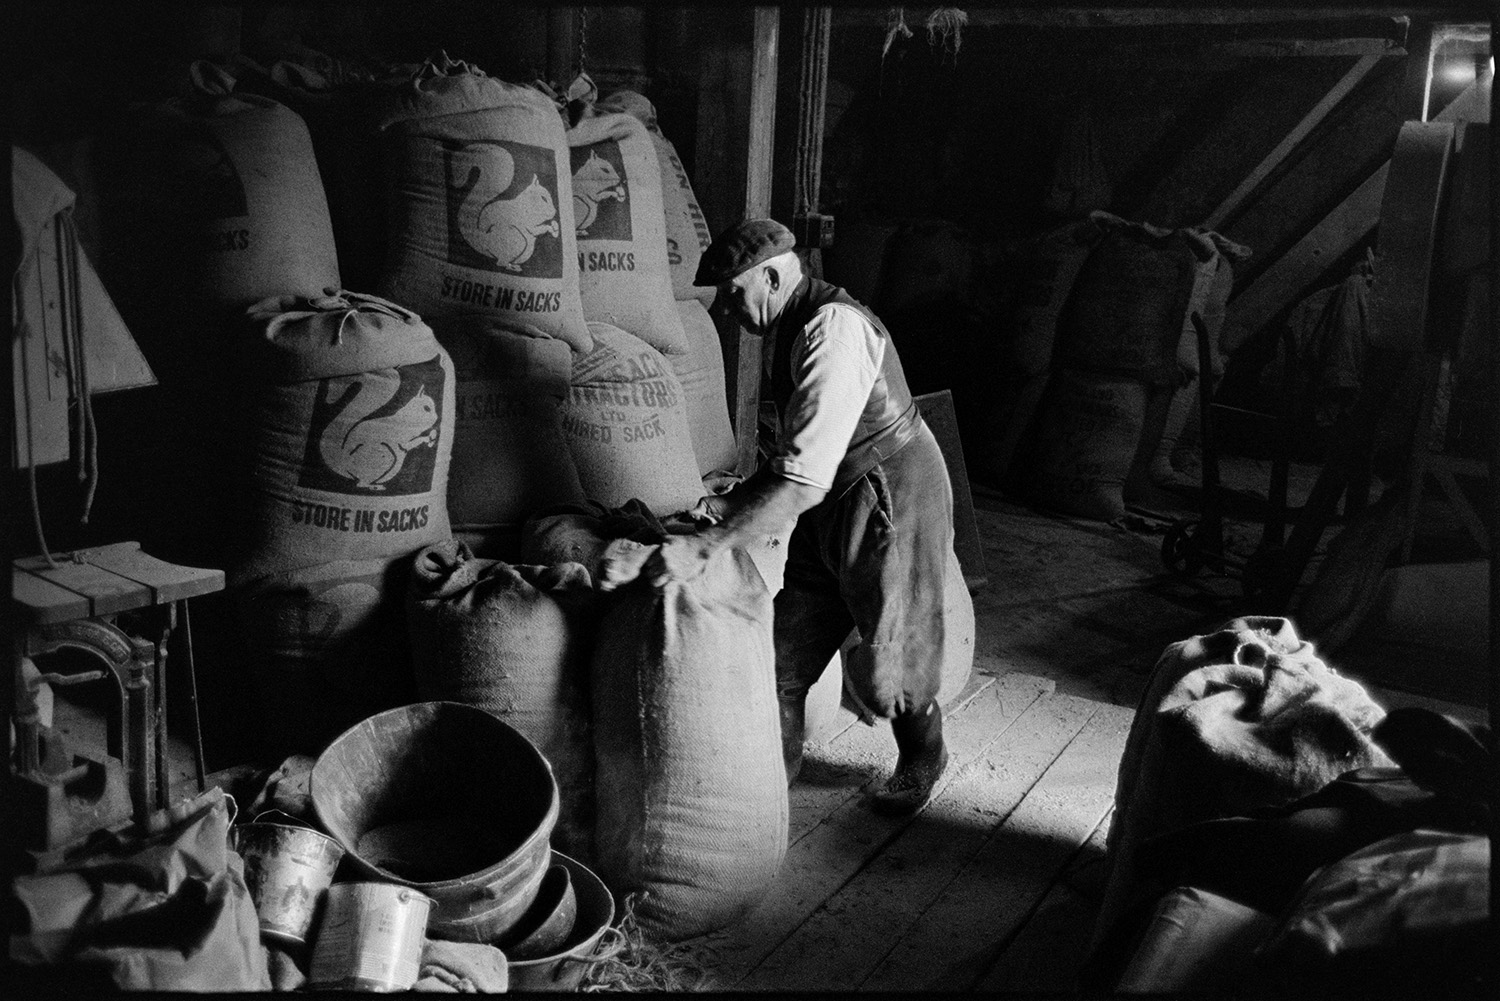 Farmer grinding corn in barn, ancient Elizabethan building sacks piled high. 
[Mr Pearce with sacks of corn piled up in an ancient Elizabeth barn in Monkokehampton. Buckets are visible in the foreground.]